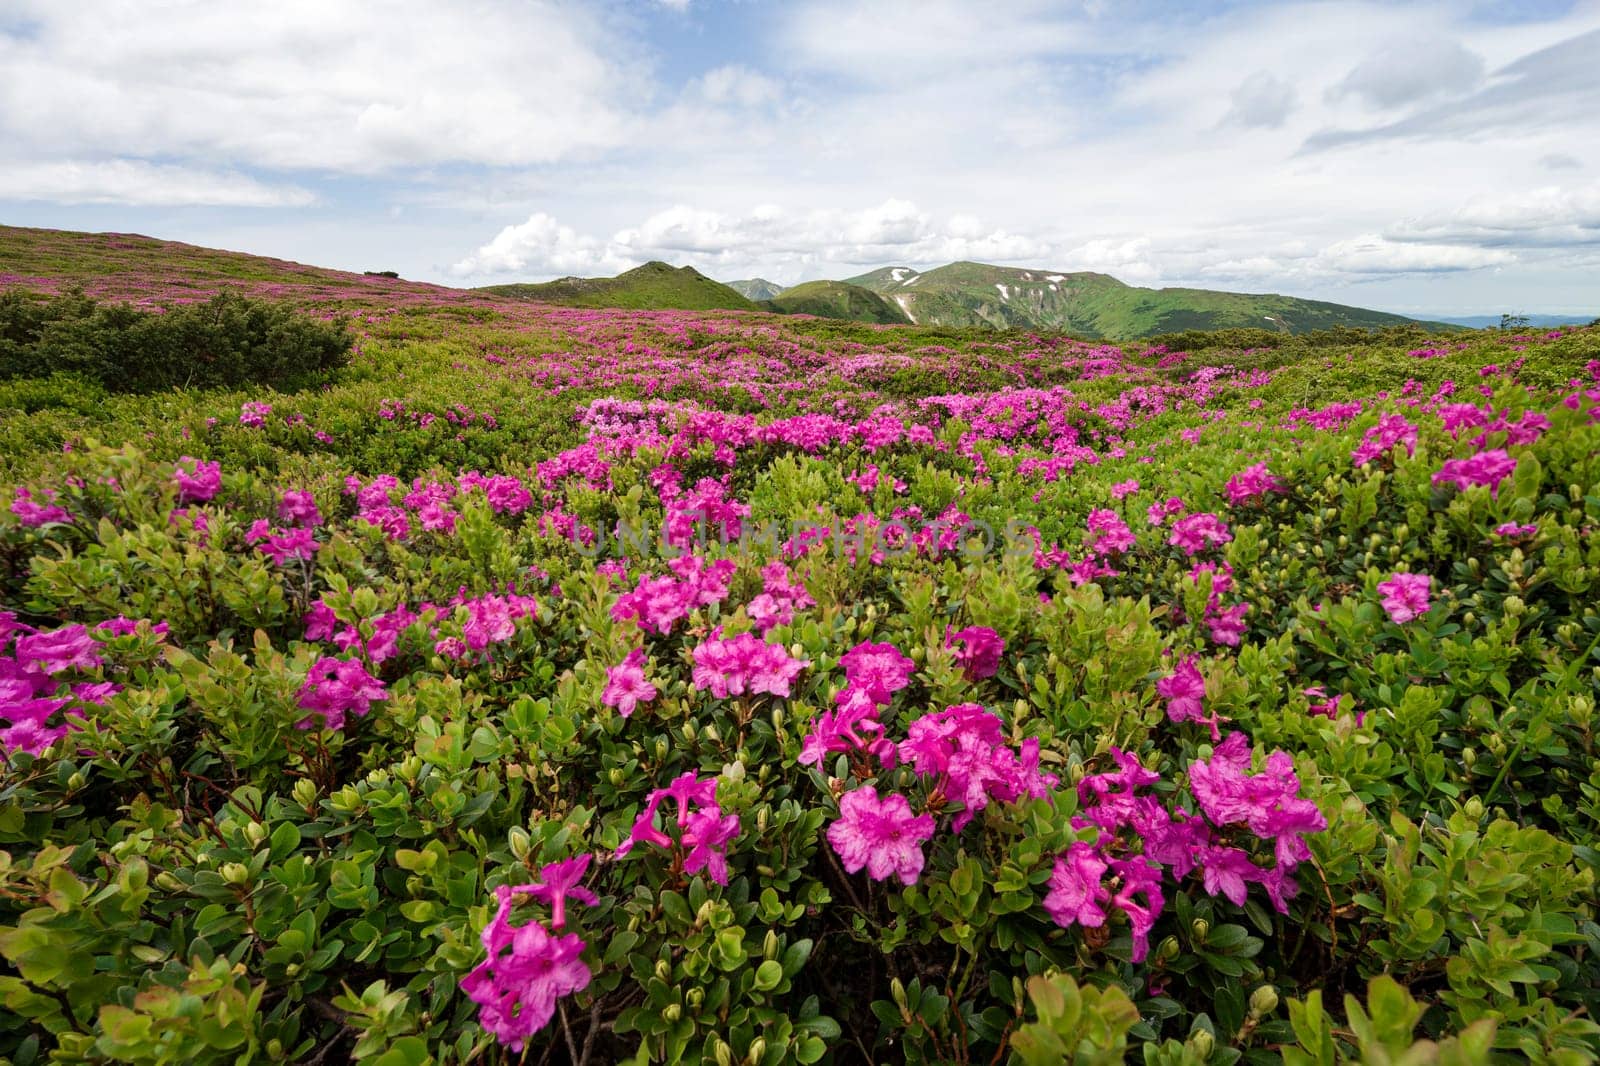 A meadow with flowering rhododendron bushes and a view of the Montenegrin mountain range. by Niko_Cingaryuk